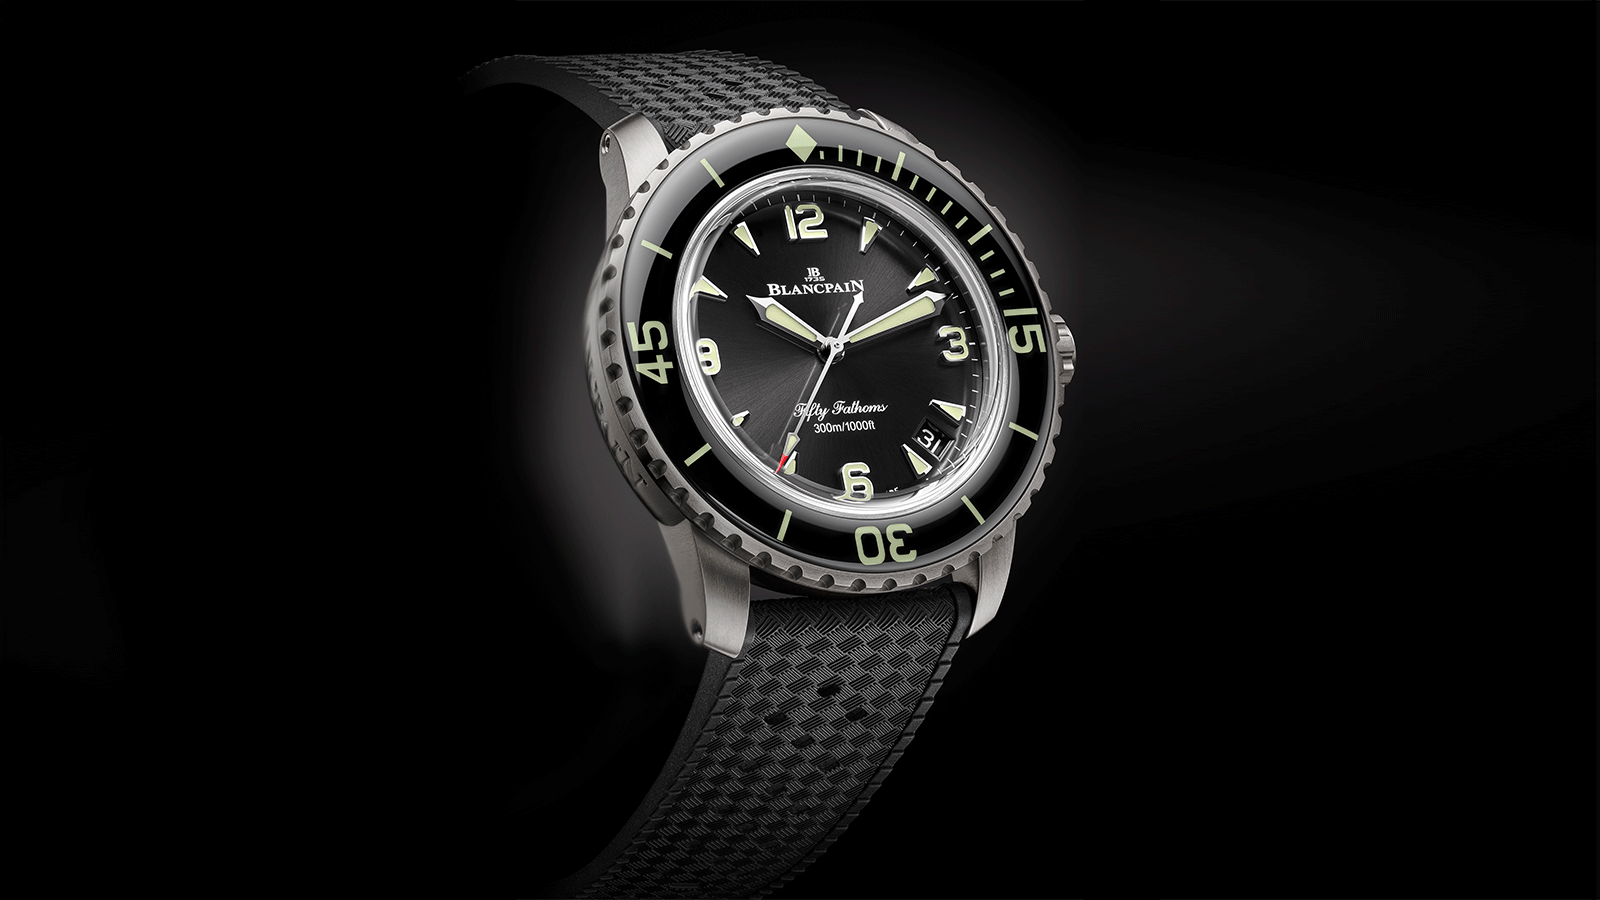 The New Blancpain Fifty-Fathoms in Titanium.